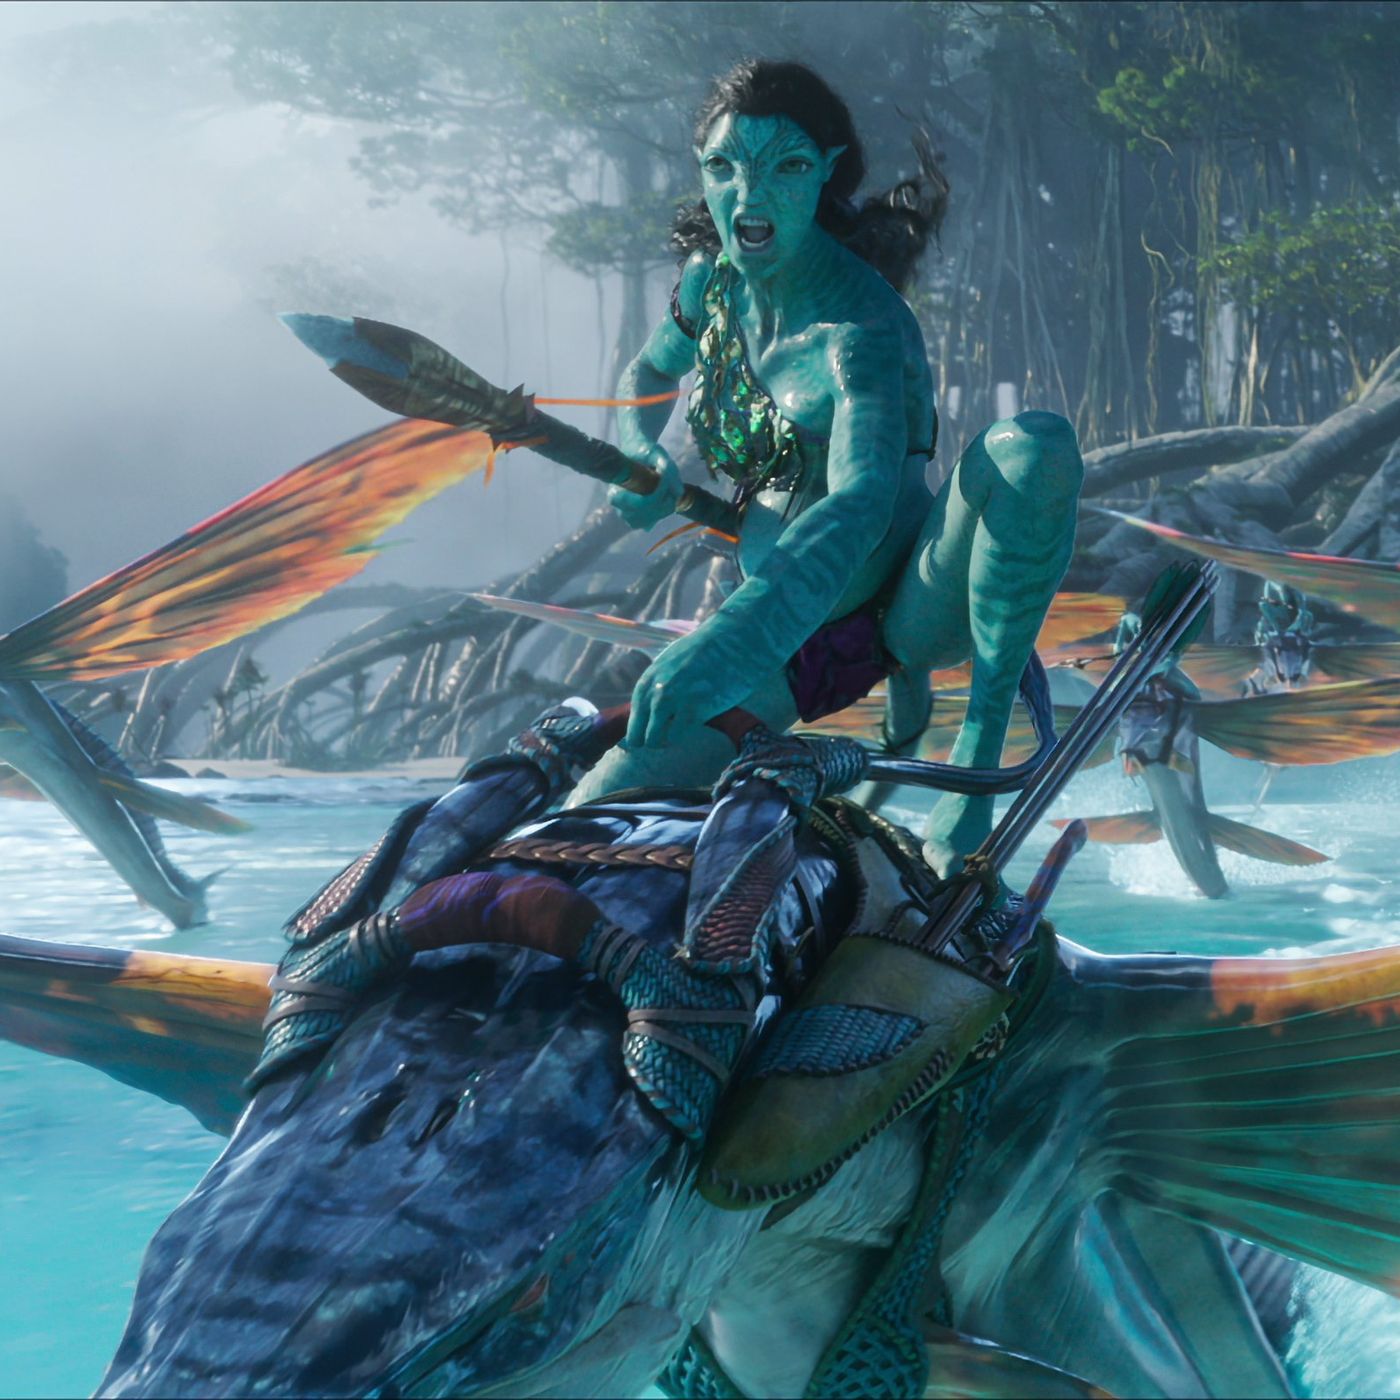 Avatar The Way of Water Final Trailer Shows Off Pandoras Oceans